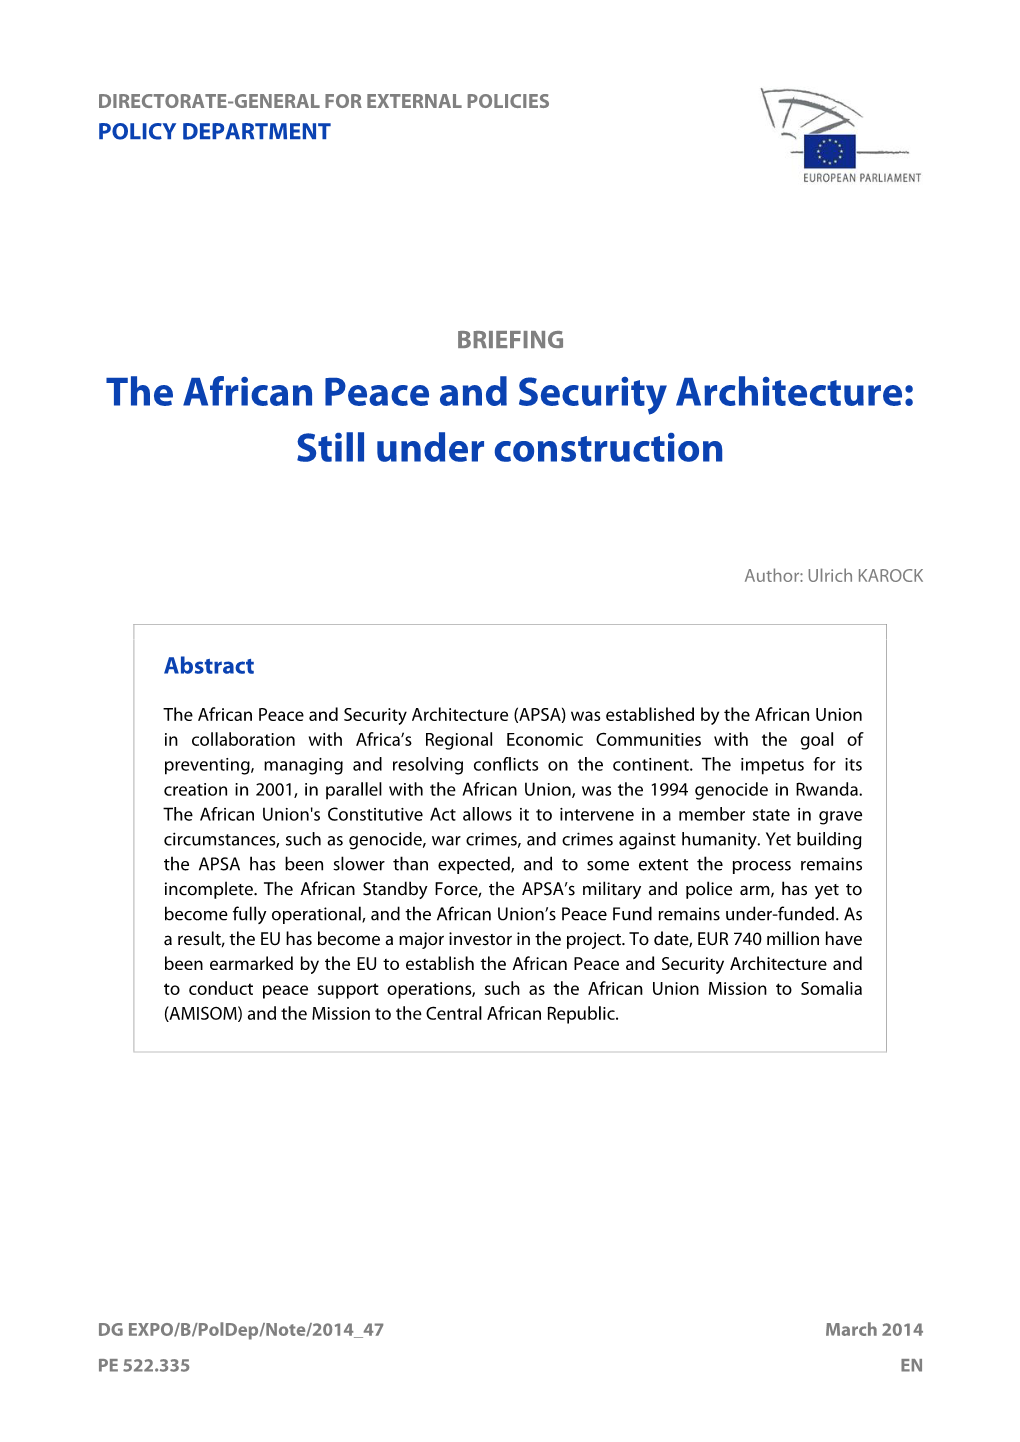 The African Peace and Security Architecture: Still Under Construction